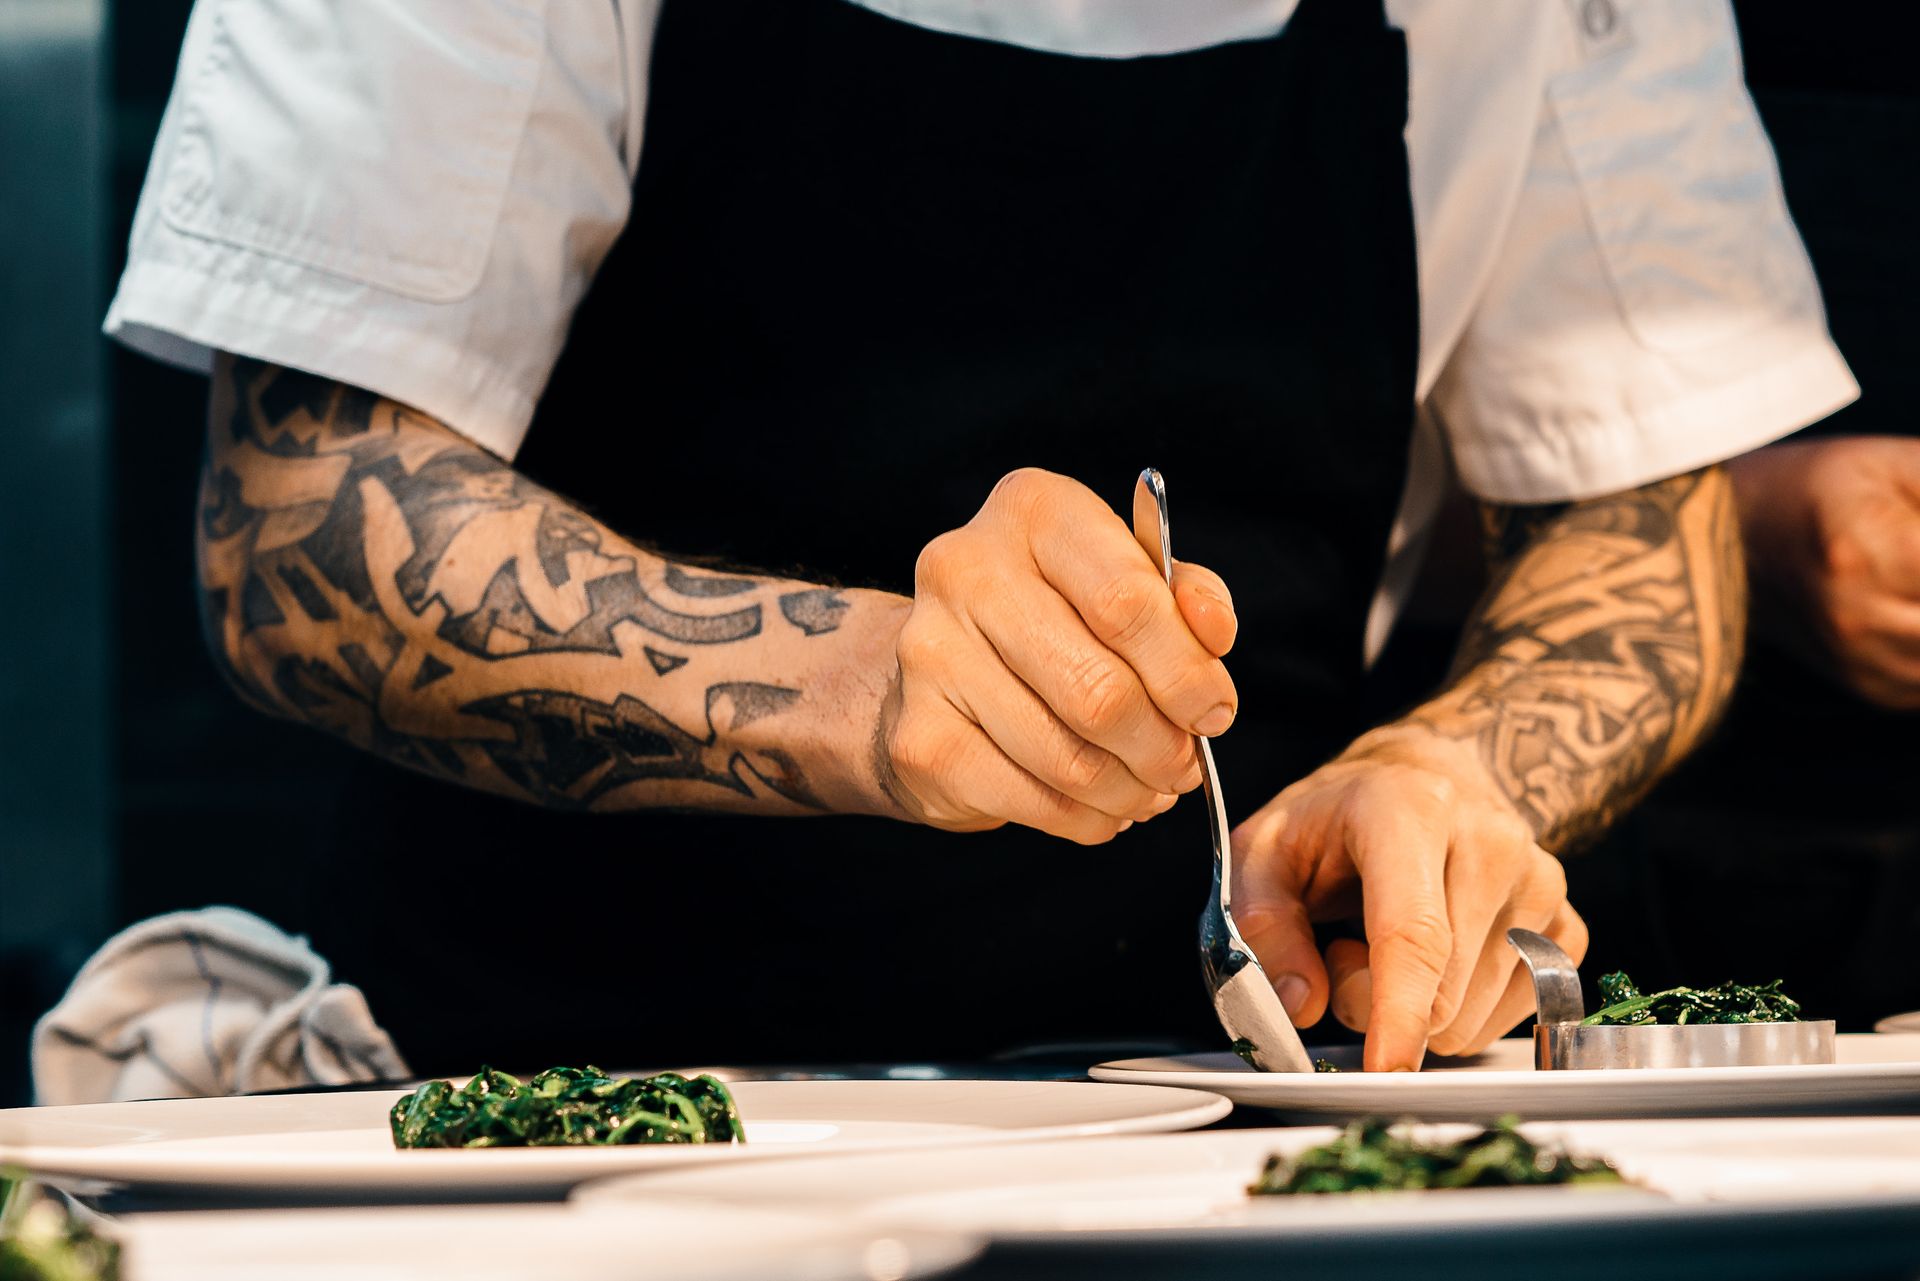 A chef plating greens on white plates